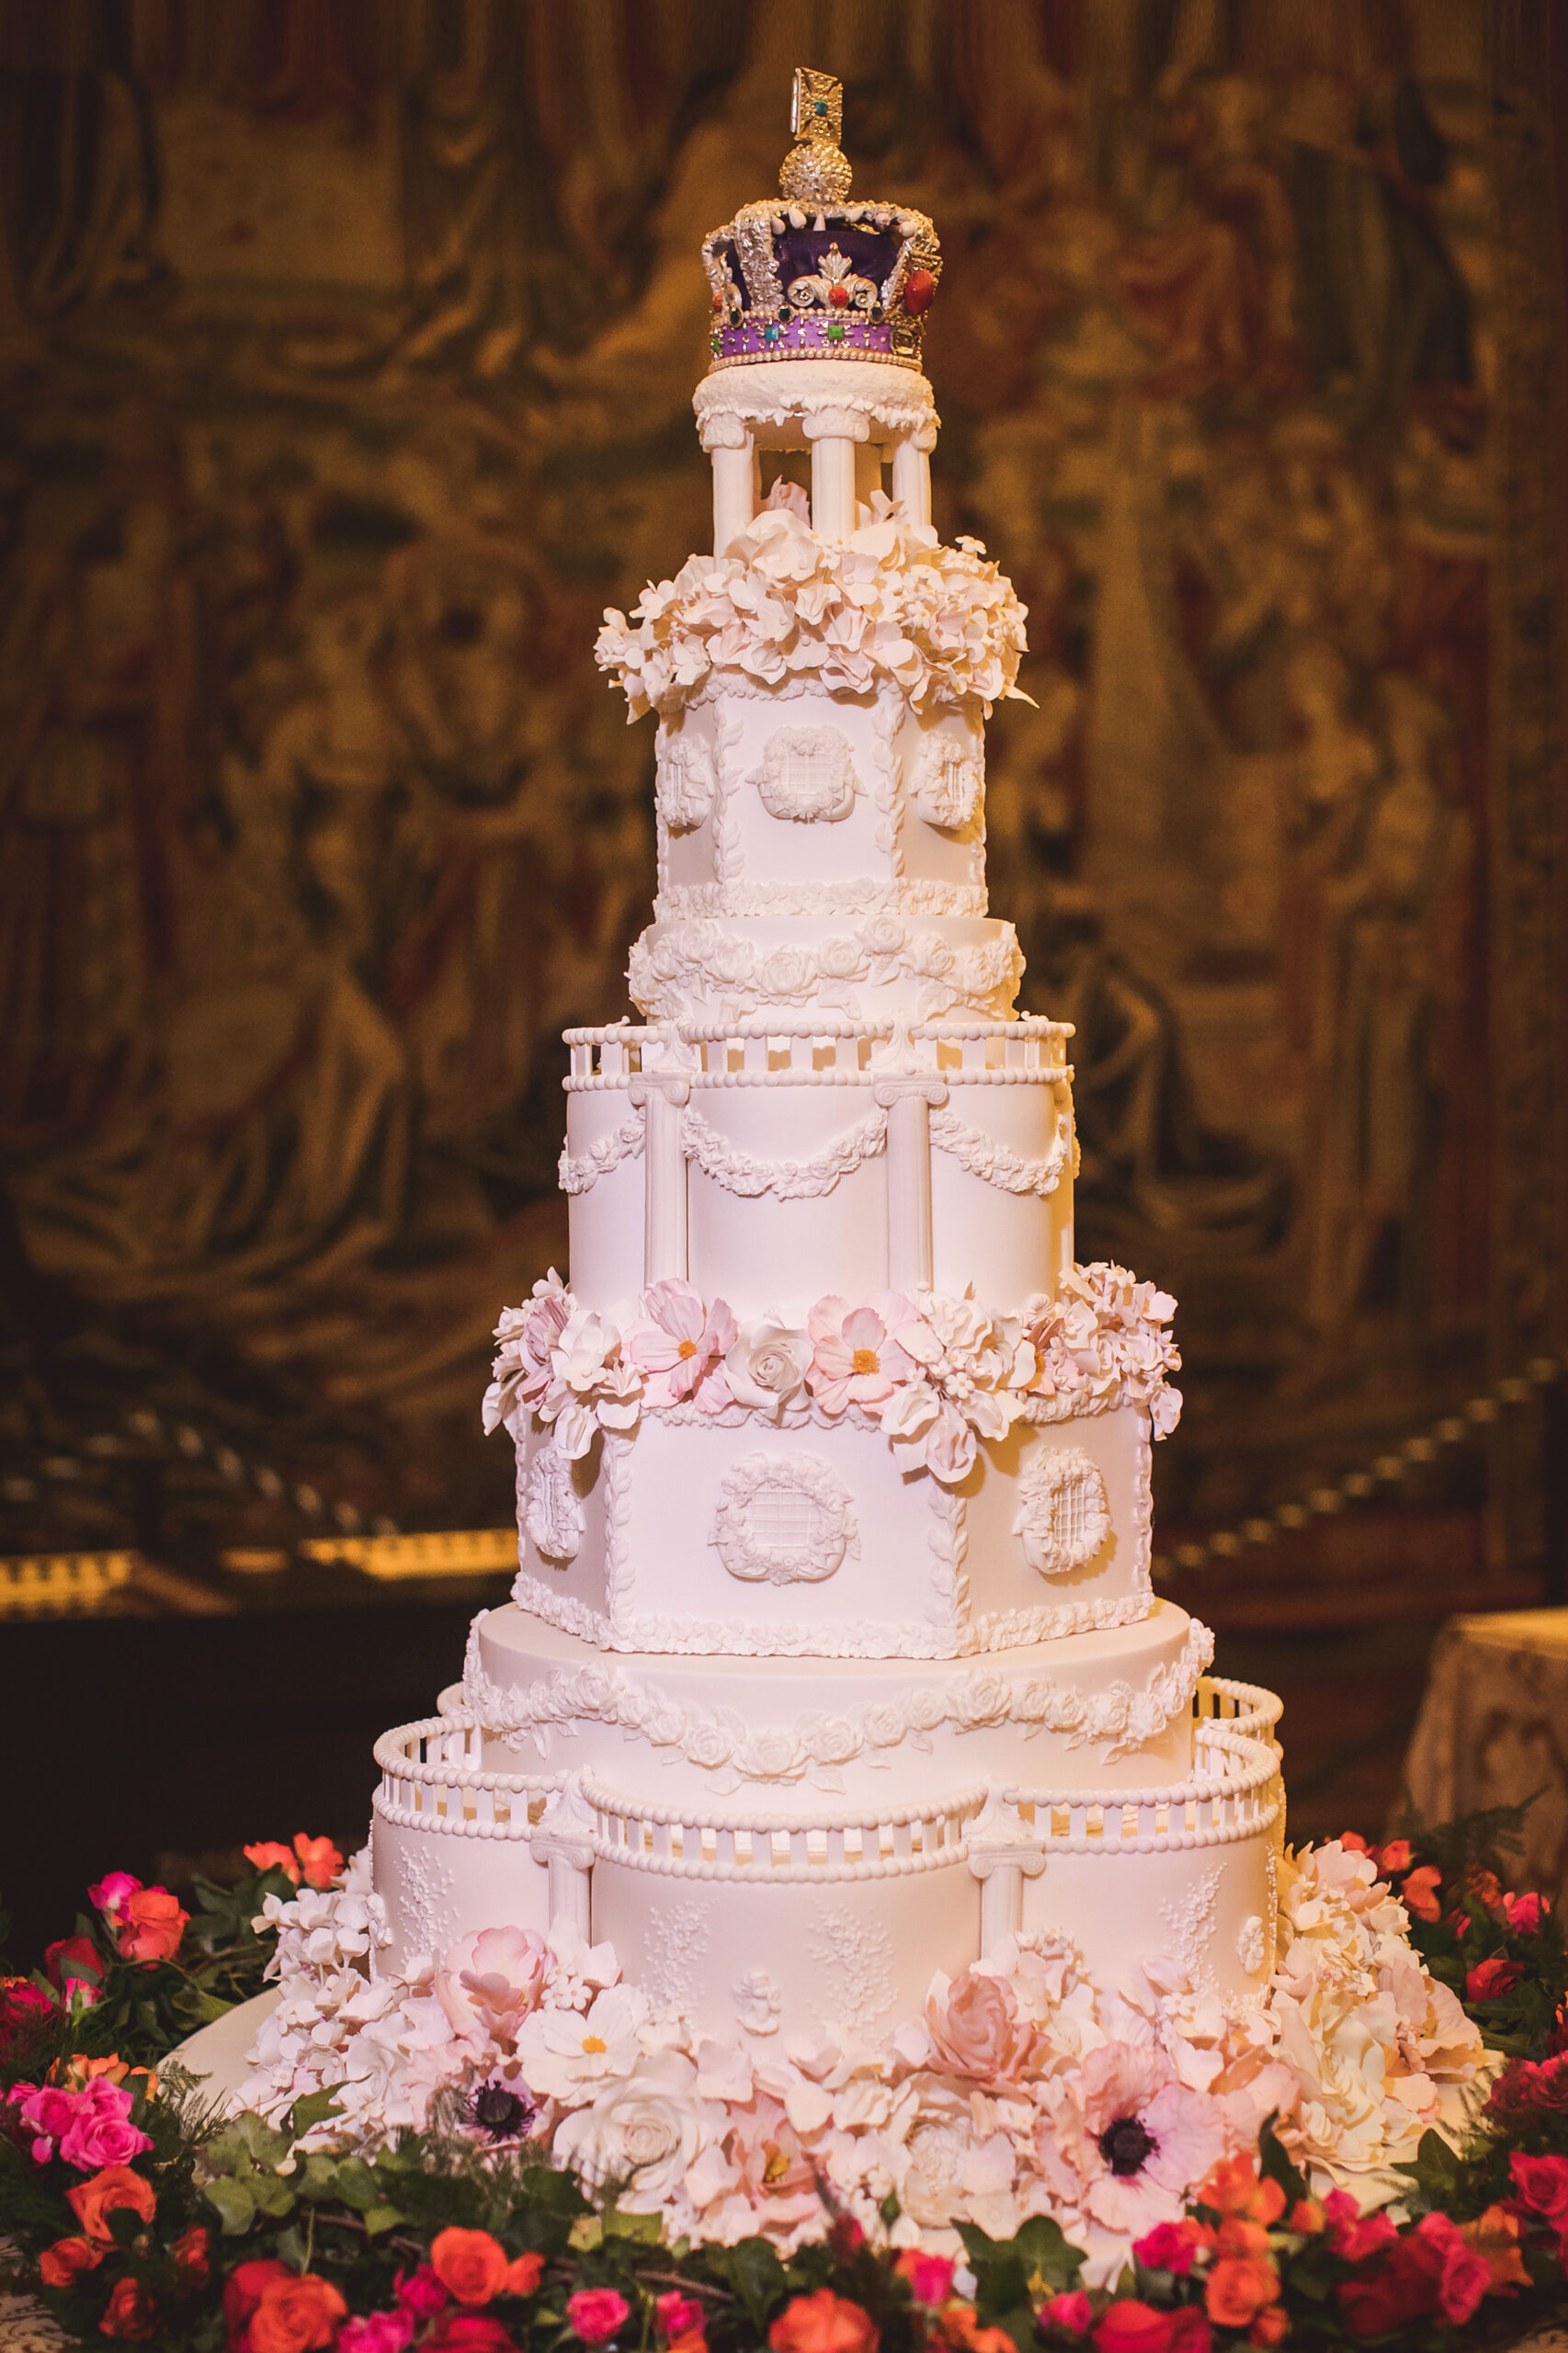 Opulent wedding cake By Yevnig with representation of the Imperial State Crown on top. Photographed by Nick Rose Photography at Hampton Court Palace